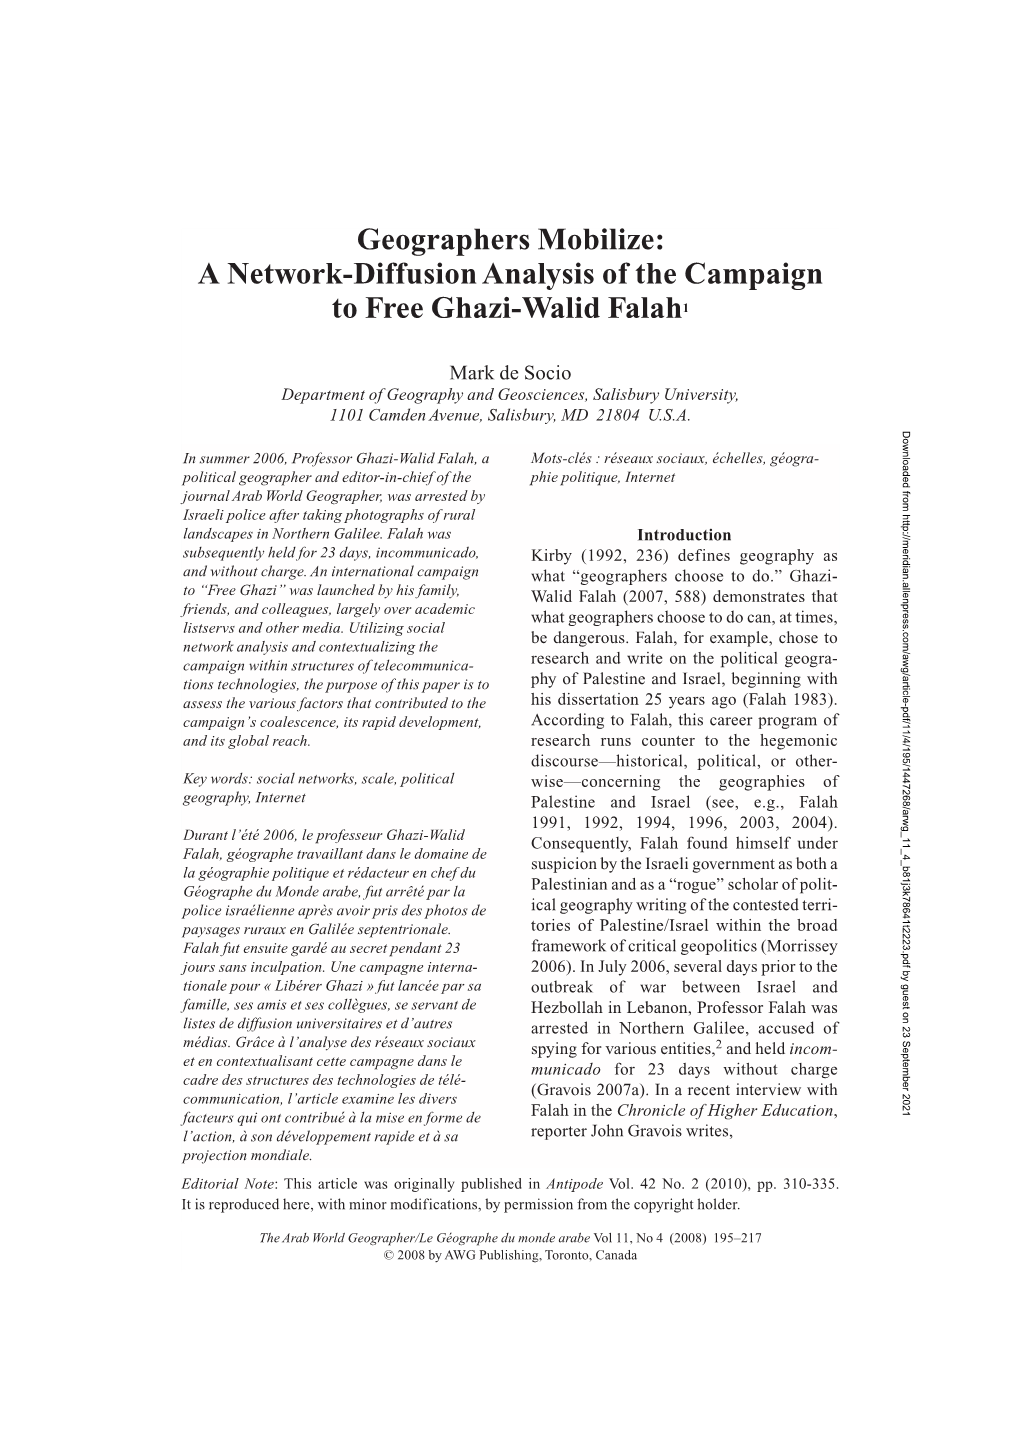 Geographers Mobilize: a Network-Diffusion Analysis of the Campaign to Free Ghazi-Walid Falah1